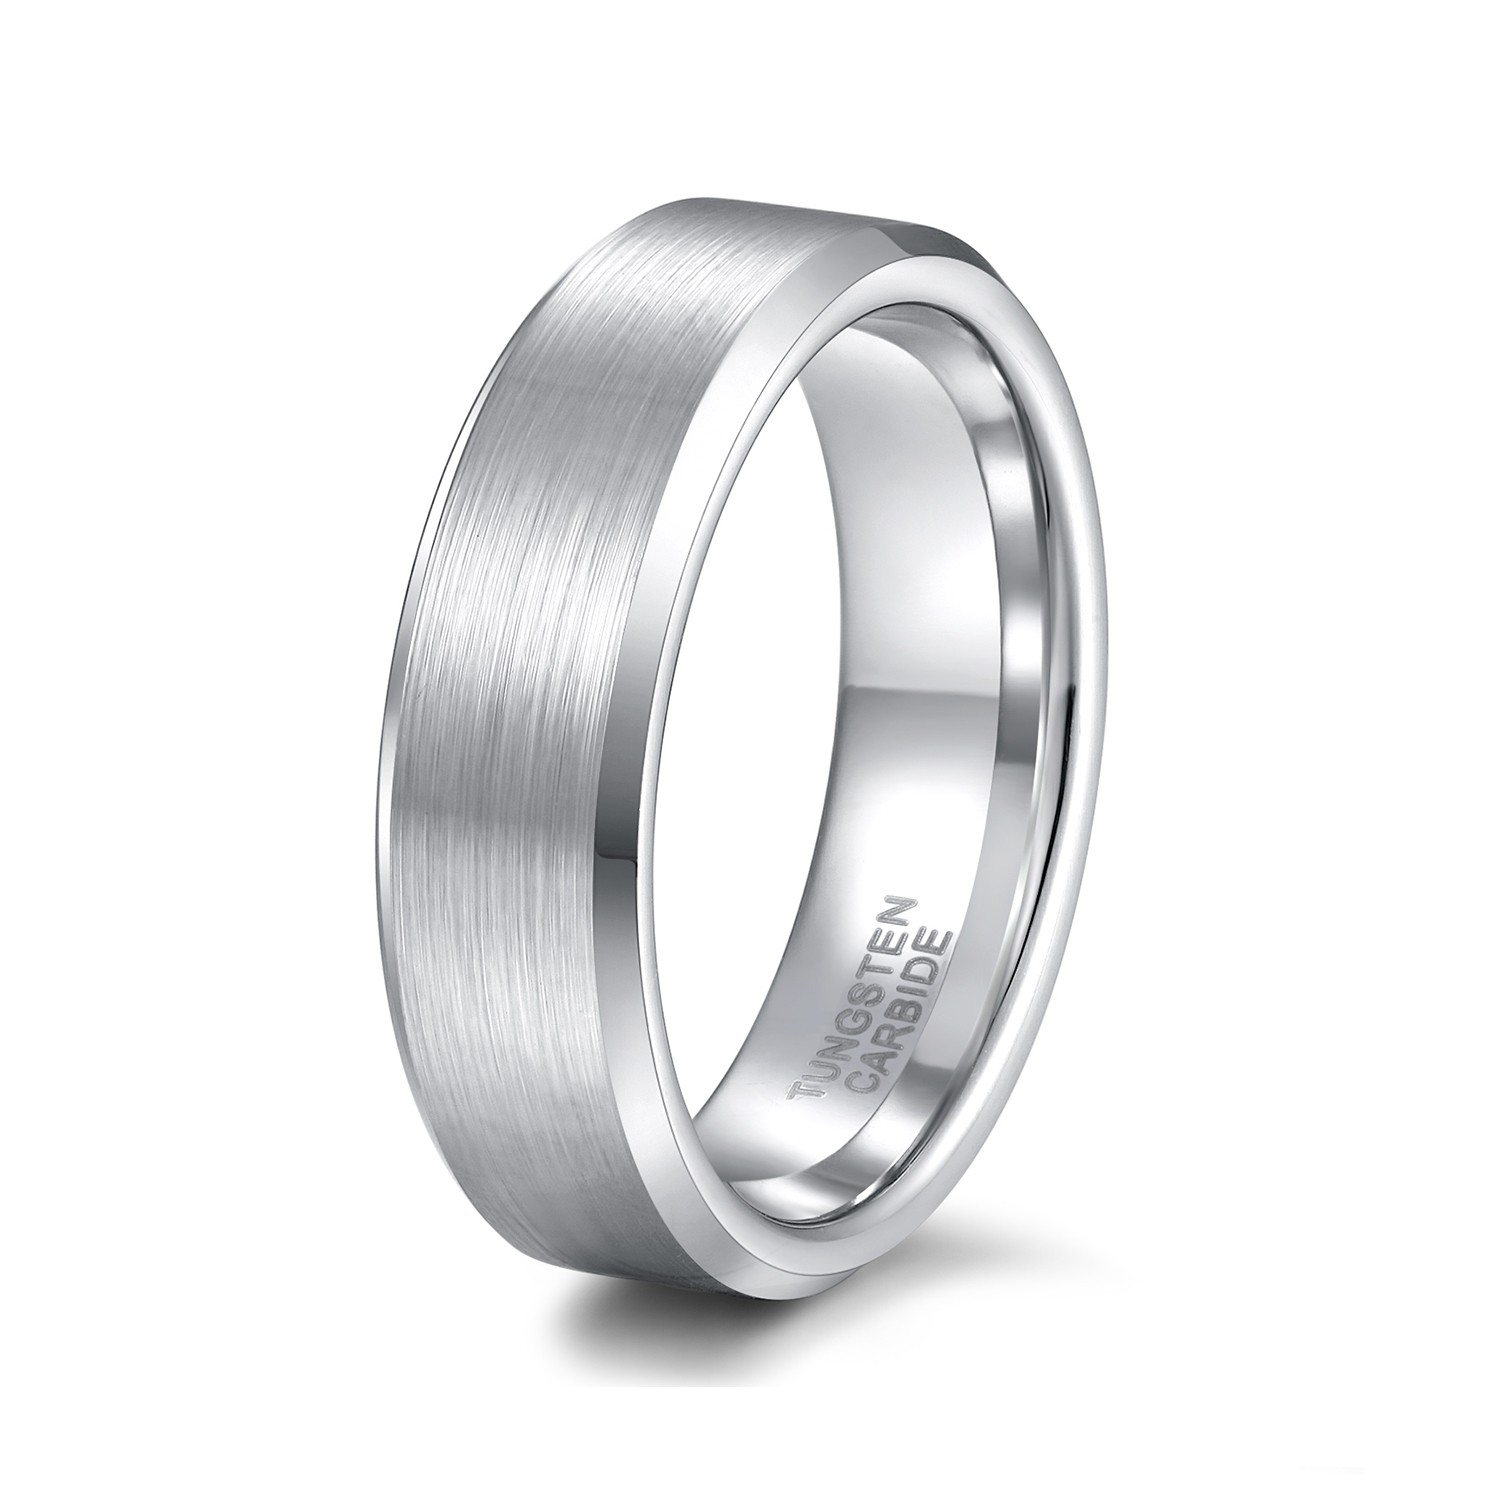 ATOp Silver Tungsten Wedding Bands for Men Women Brushed Center and Beveled